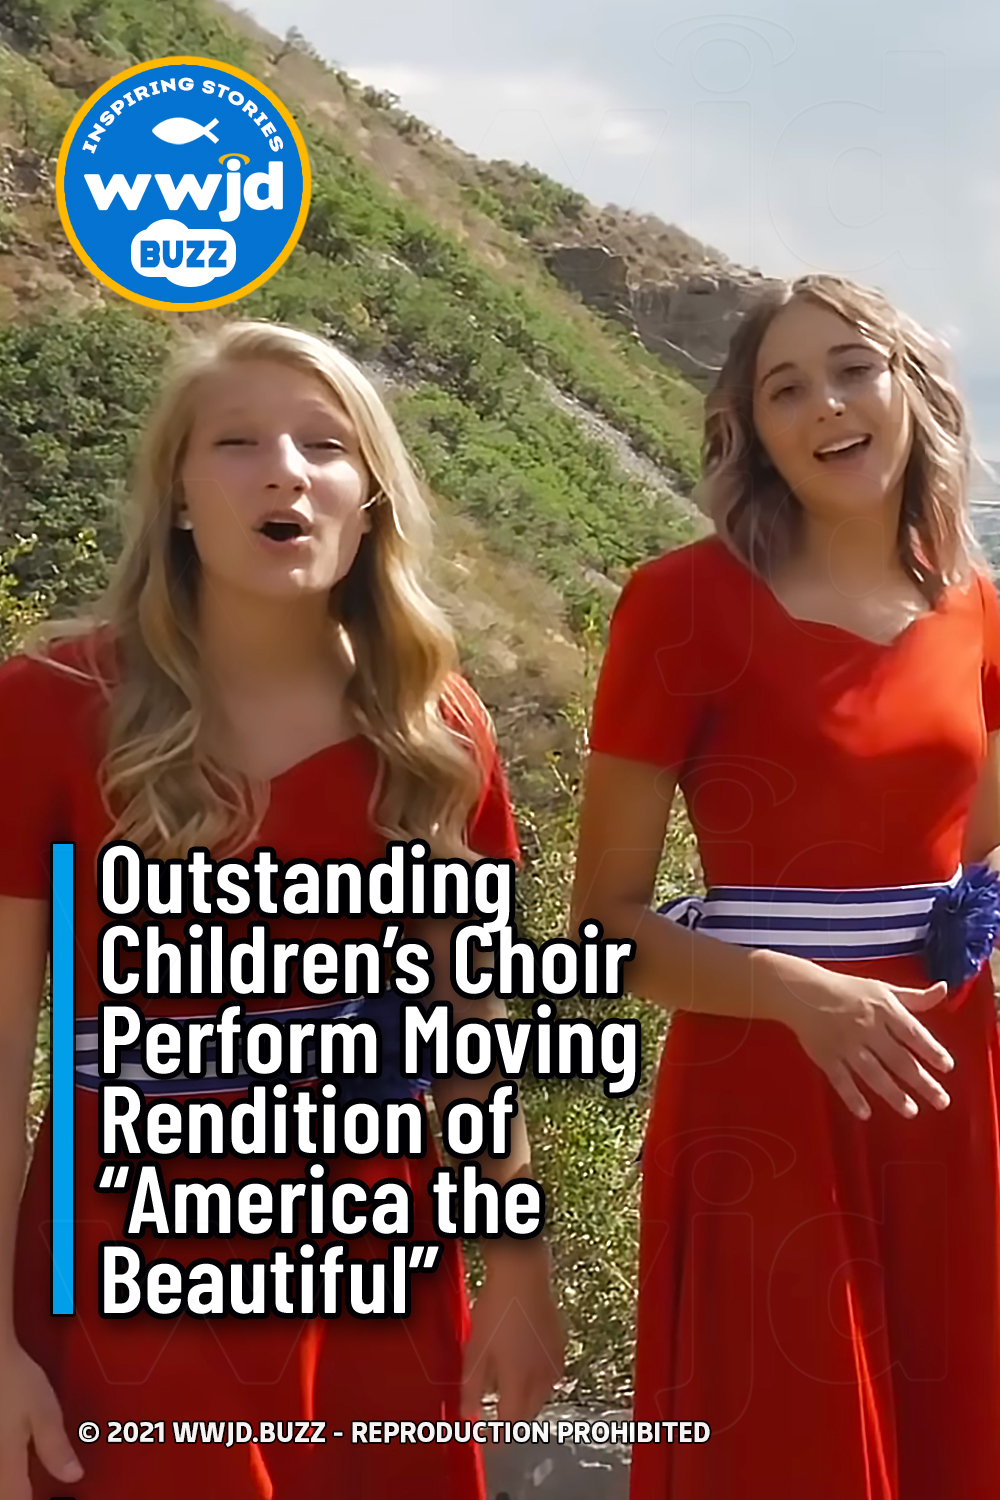 Outstanding Children’s Choir Perform Moving Rendition of “America the Beautiful”